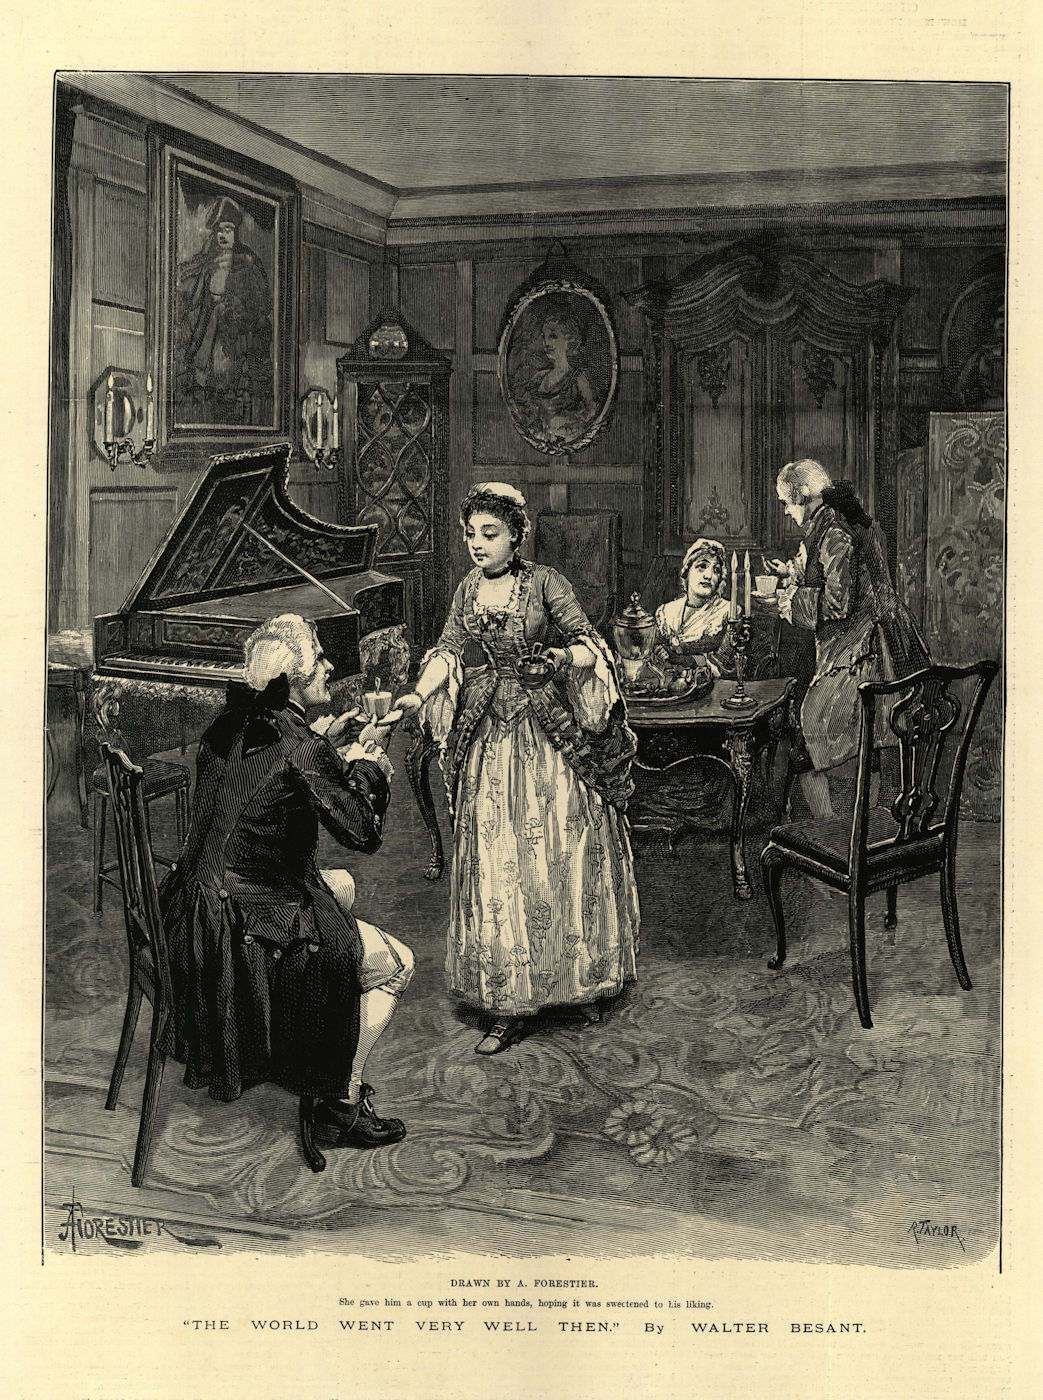 Associate Product The World went very well then, by Walter Besant. Grand piano. 1886 ILN print